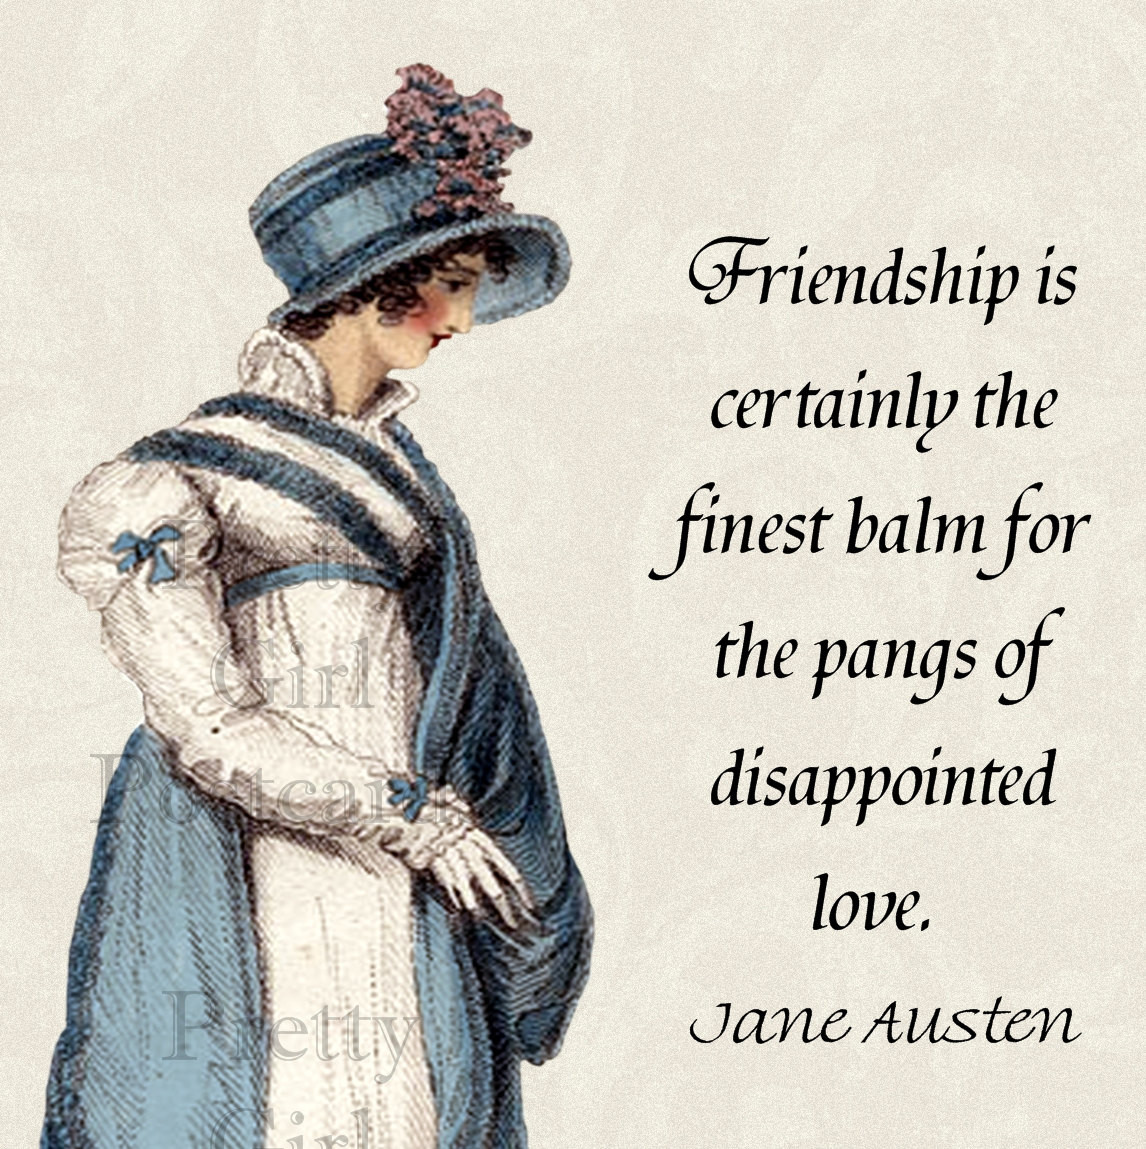 Friendship Disappointed Quotes
 Disappointed Friendship Quotes QuotesGram